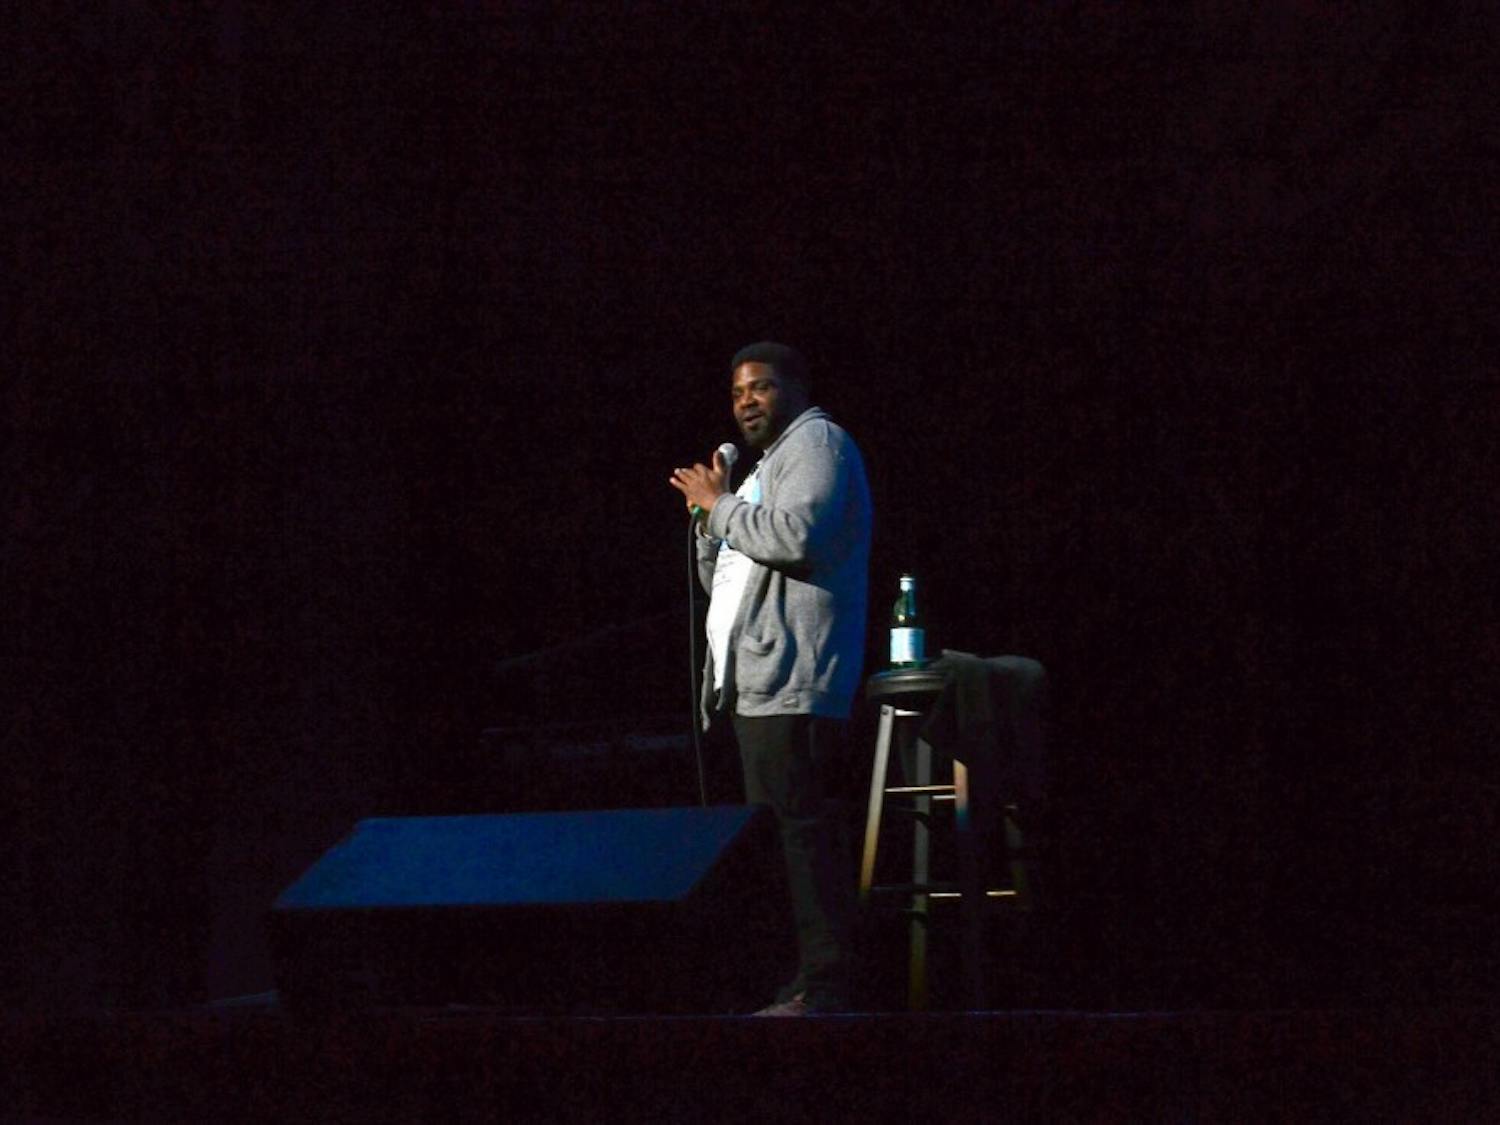 SNL Ron Funches&nbsp;appeared with comedians Anna Drezen and Alex Moffat&nbsp;as part of SA's Comedy Series Friday night.&nbsp;